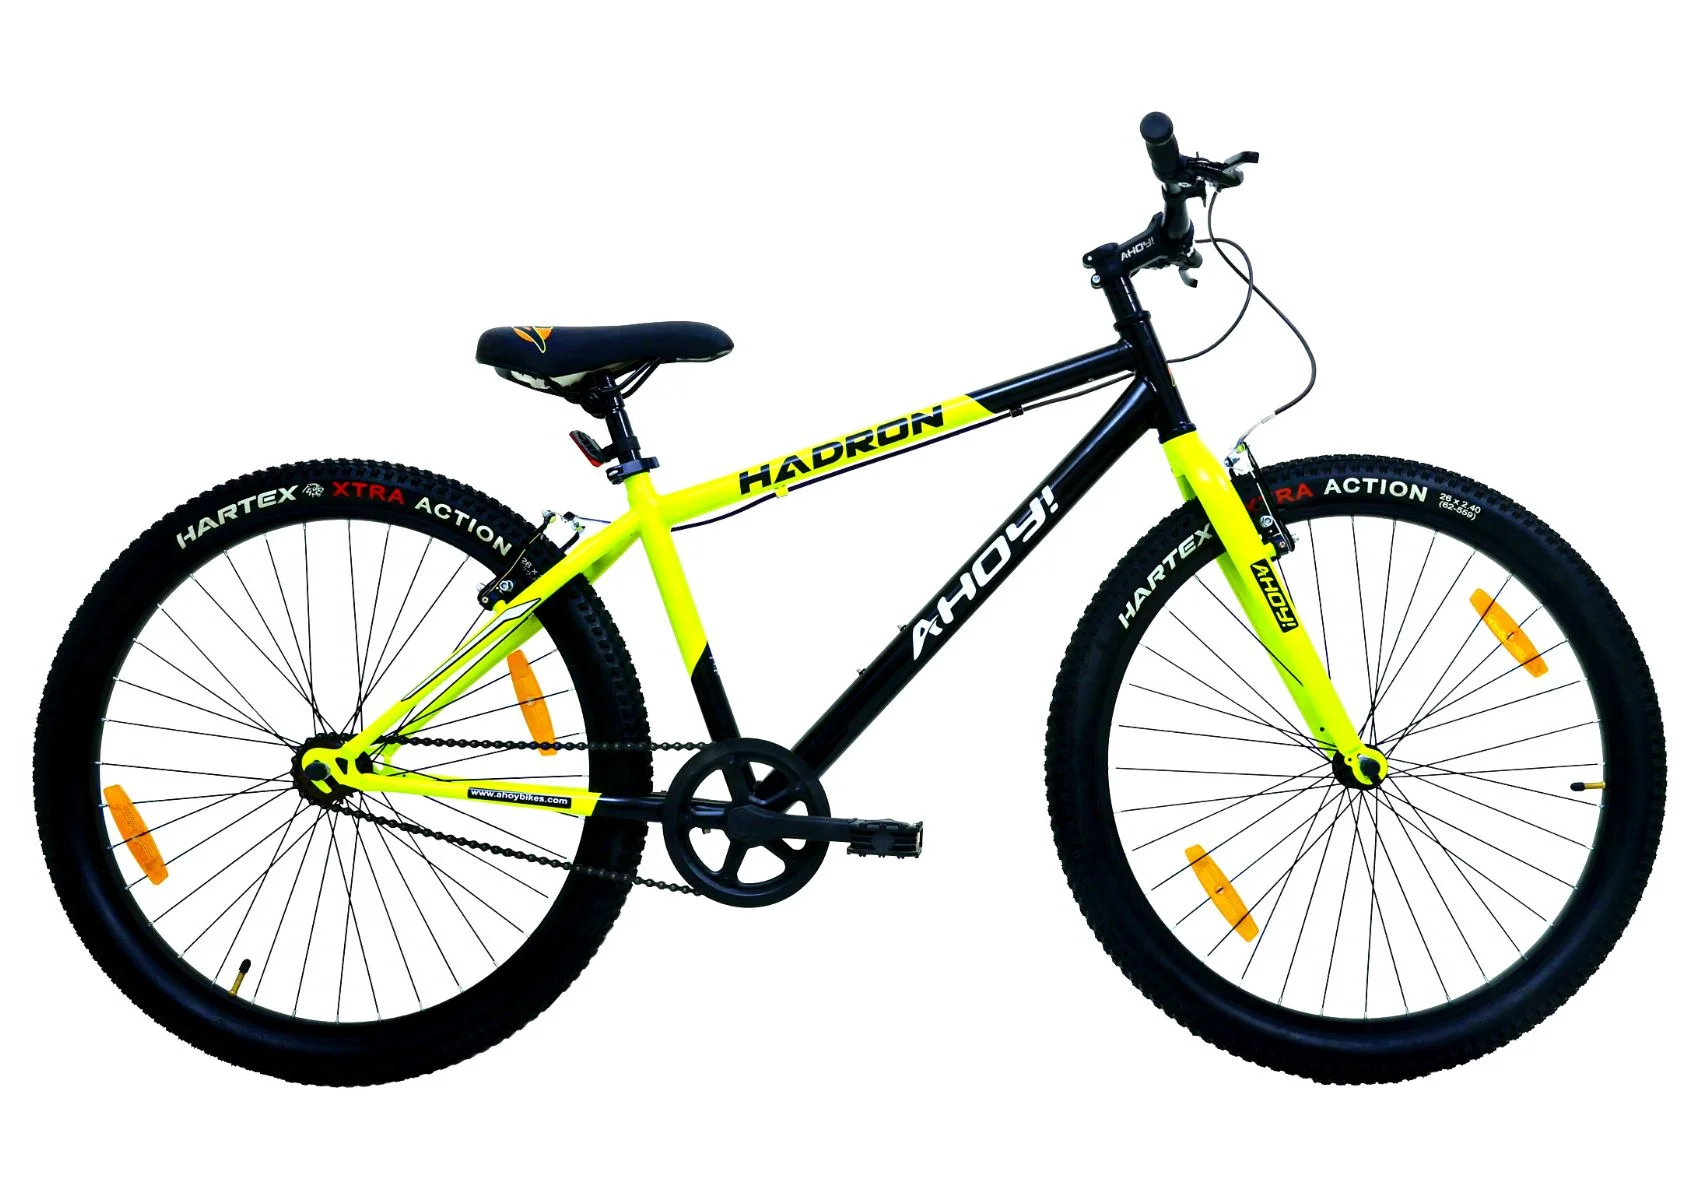 Hadron single gear cycle 24T | buy yellow bike without gear for men